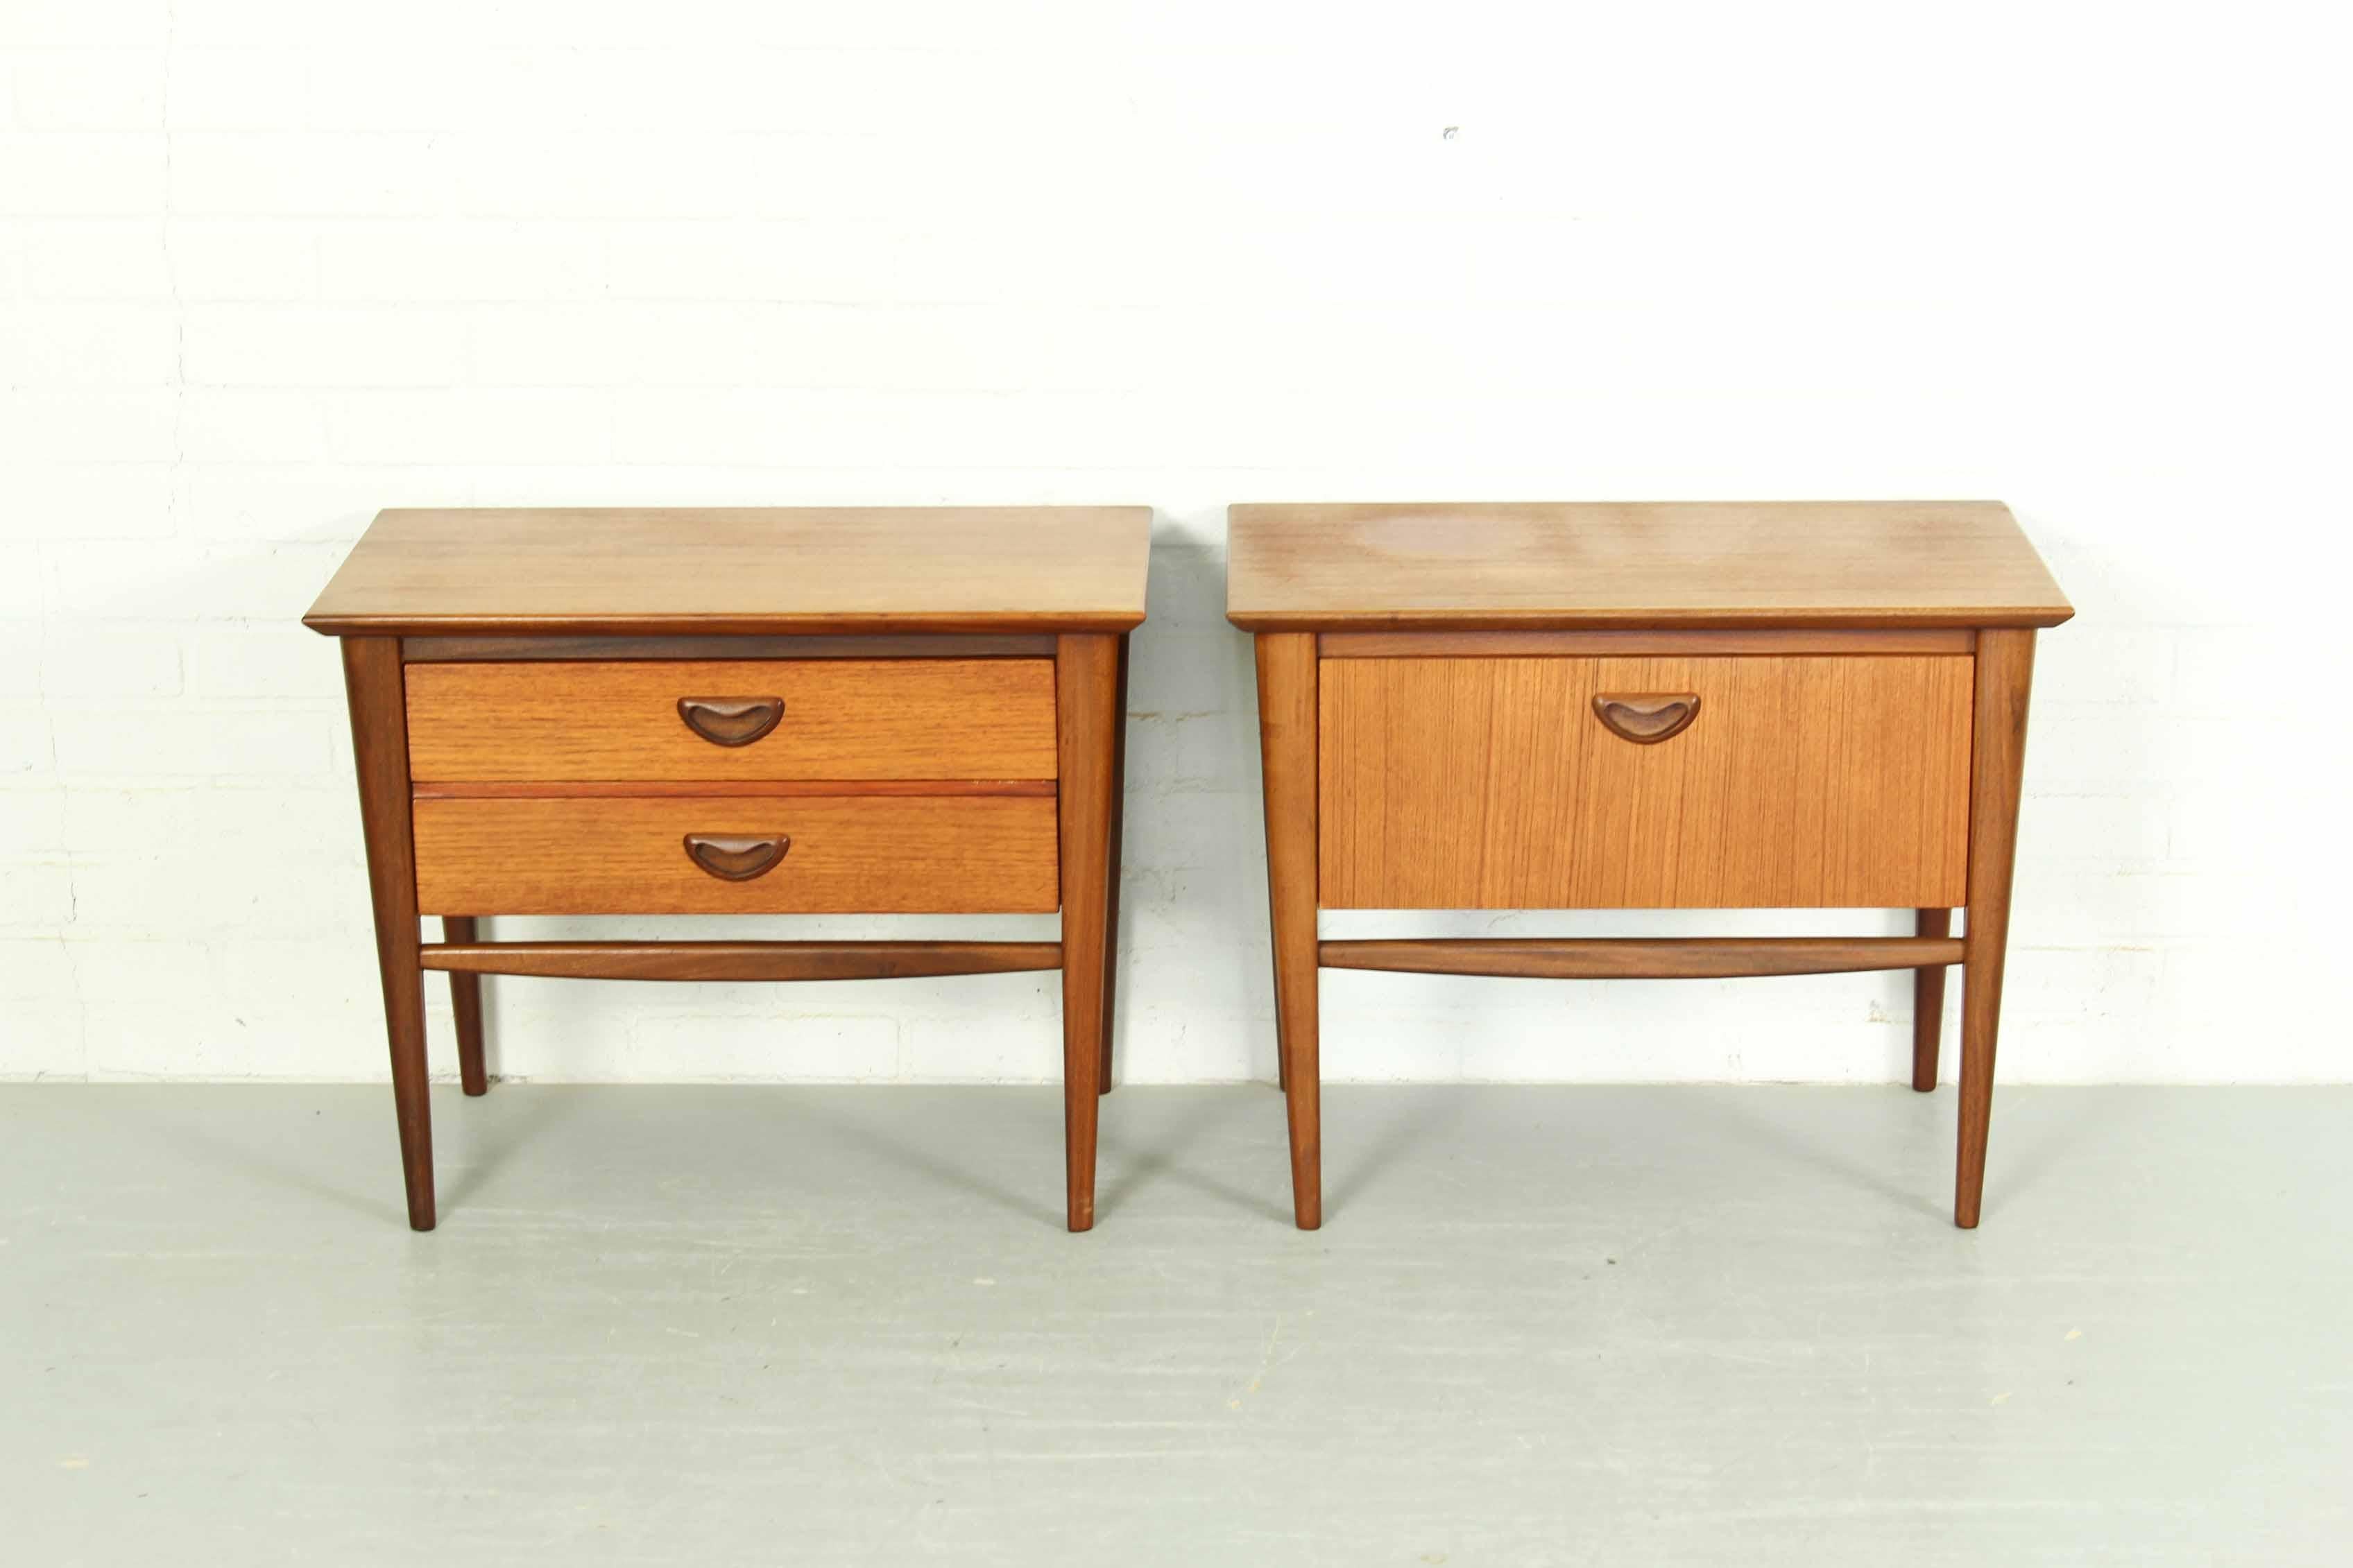 Set of nightstands designed by Louis Van Teeffelen for Webe Meubelen, Holland, 1950. Webe was one of the better furniture makers from Holland and they inspired there furniture on the Danish craze from the same era. 

Dimensions: 48cm H, 60cm W,